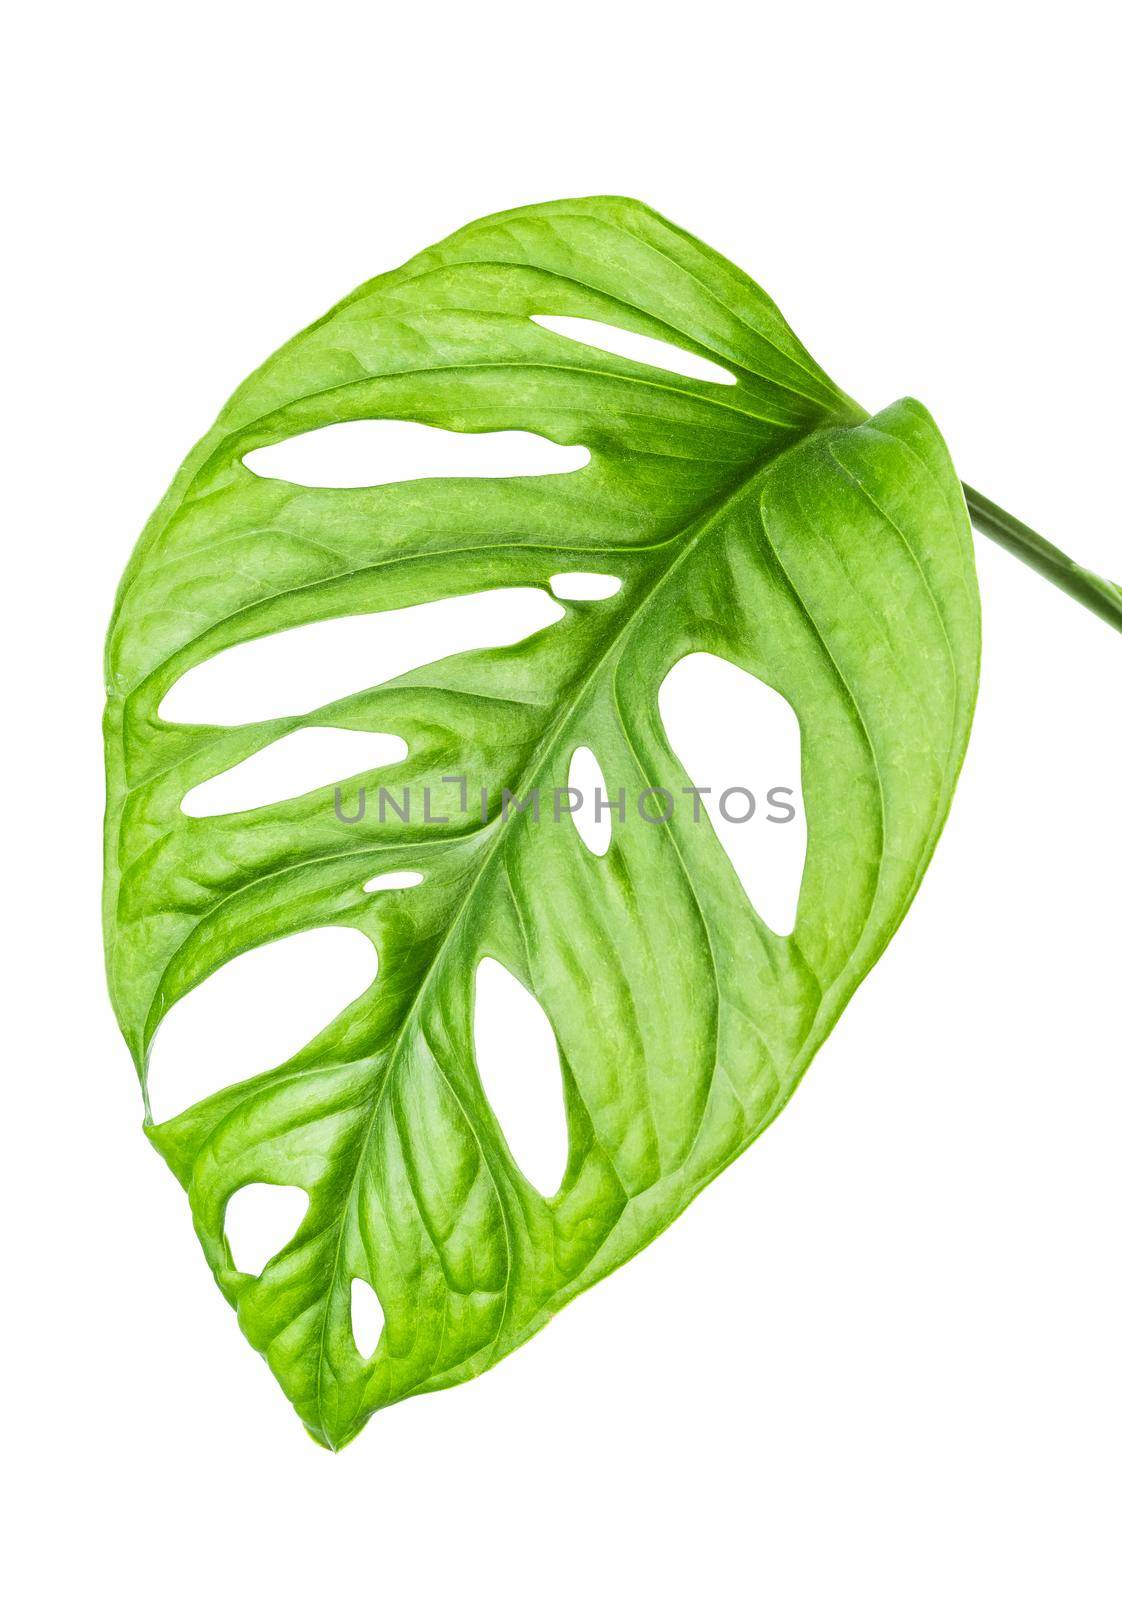 Monstera Adansonii or Monstera Monkey Mask or Swiss Cheese plant leaf isolated on white 